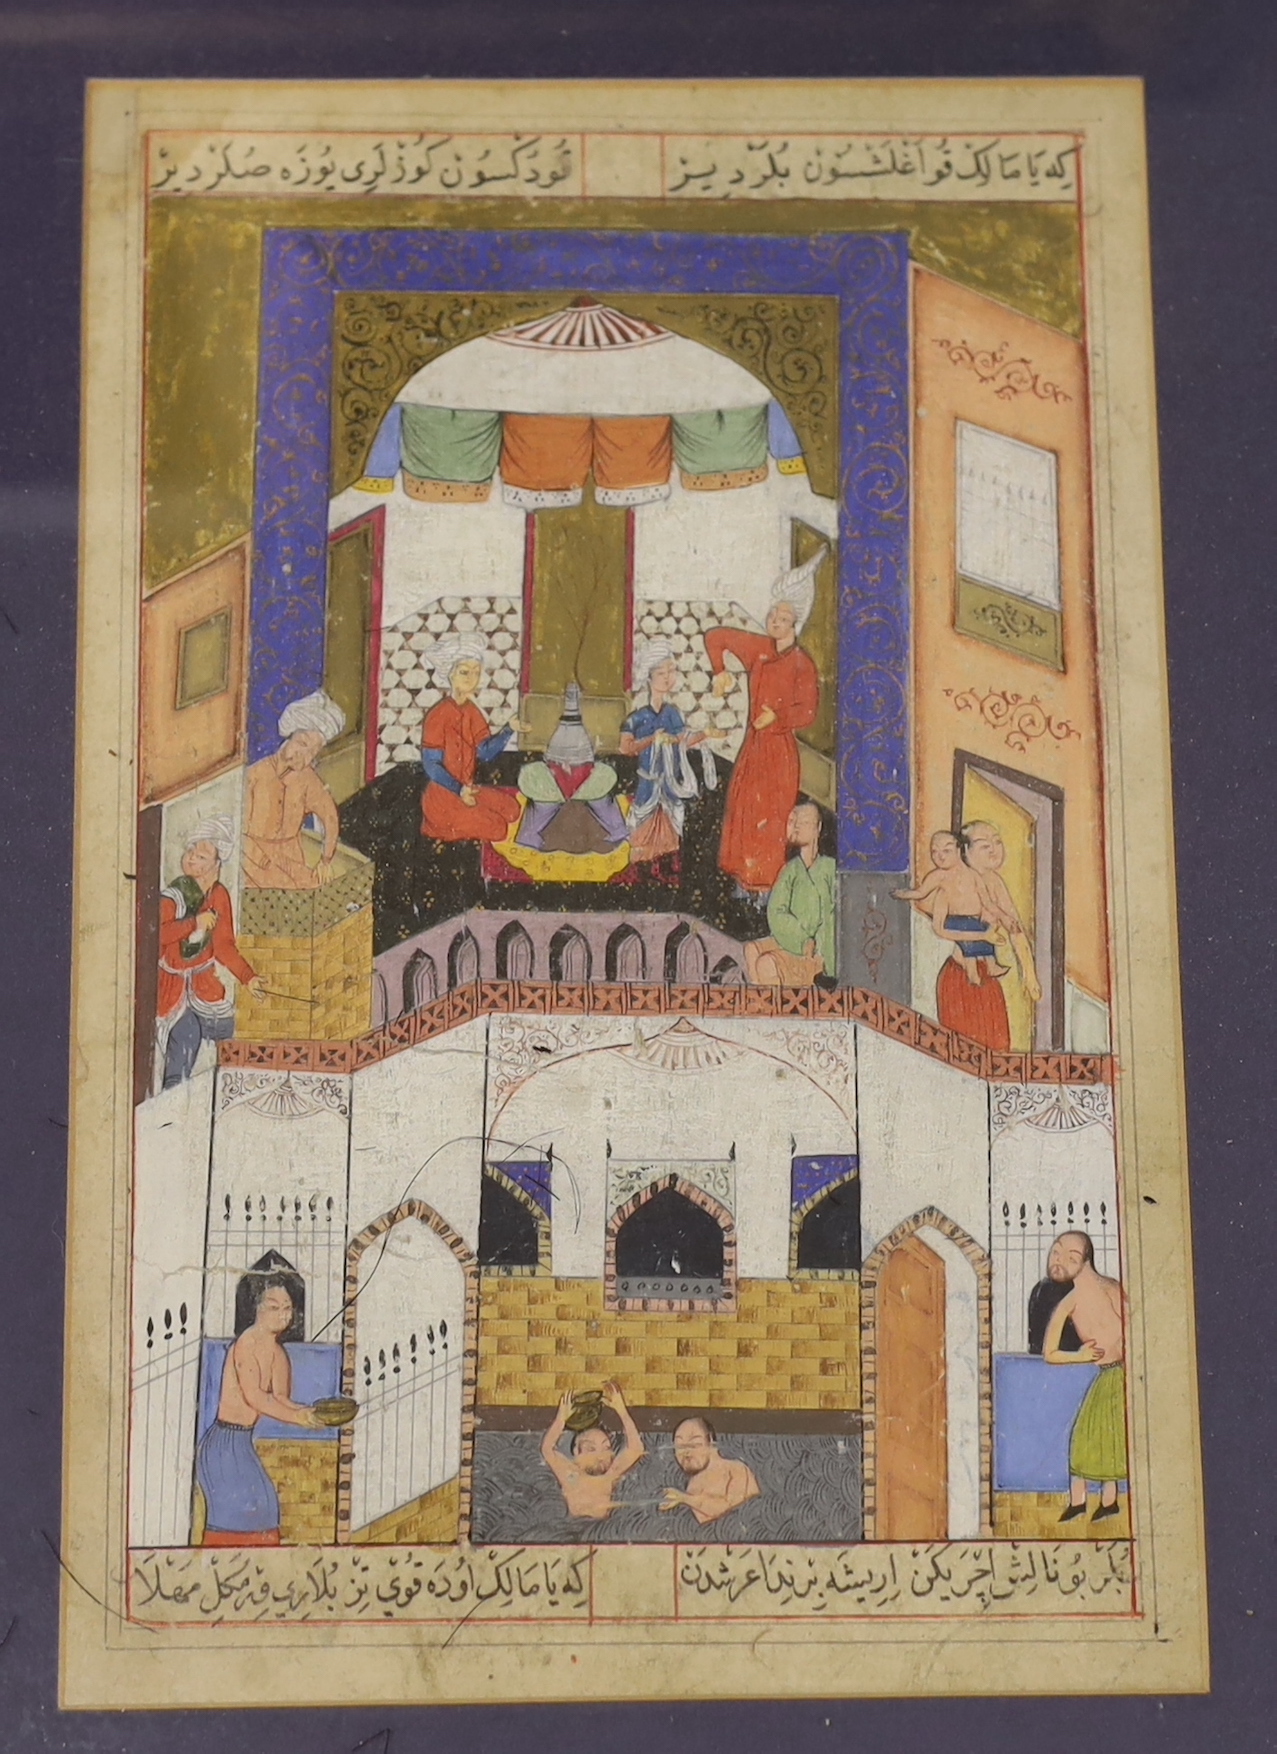 Five Indian Mughal style gouache paintings of court scenes and figures on horseback, largest 22 x 14.5cm